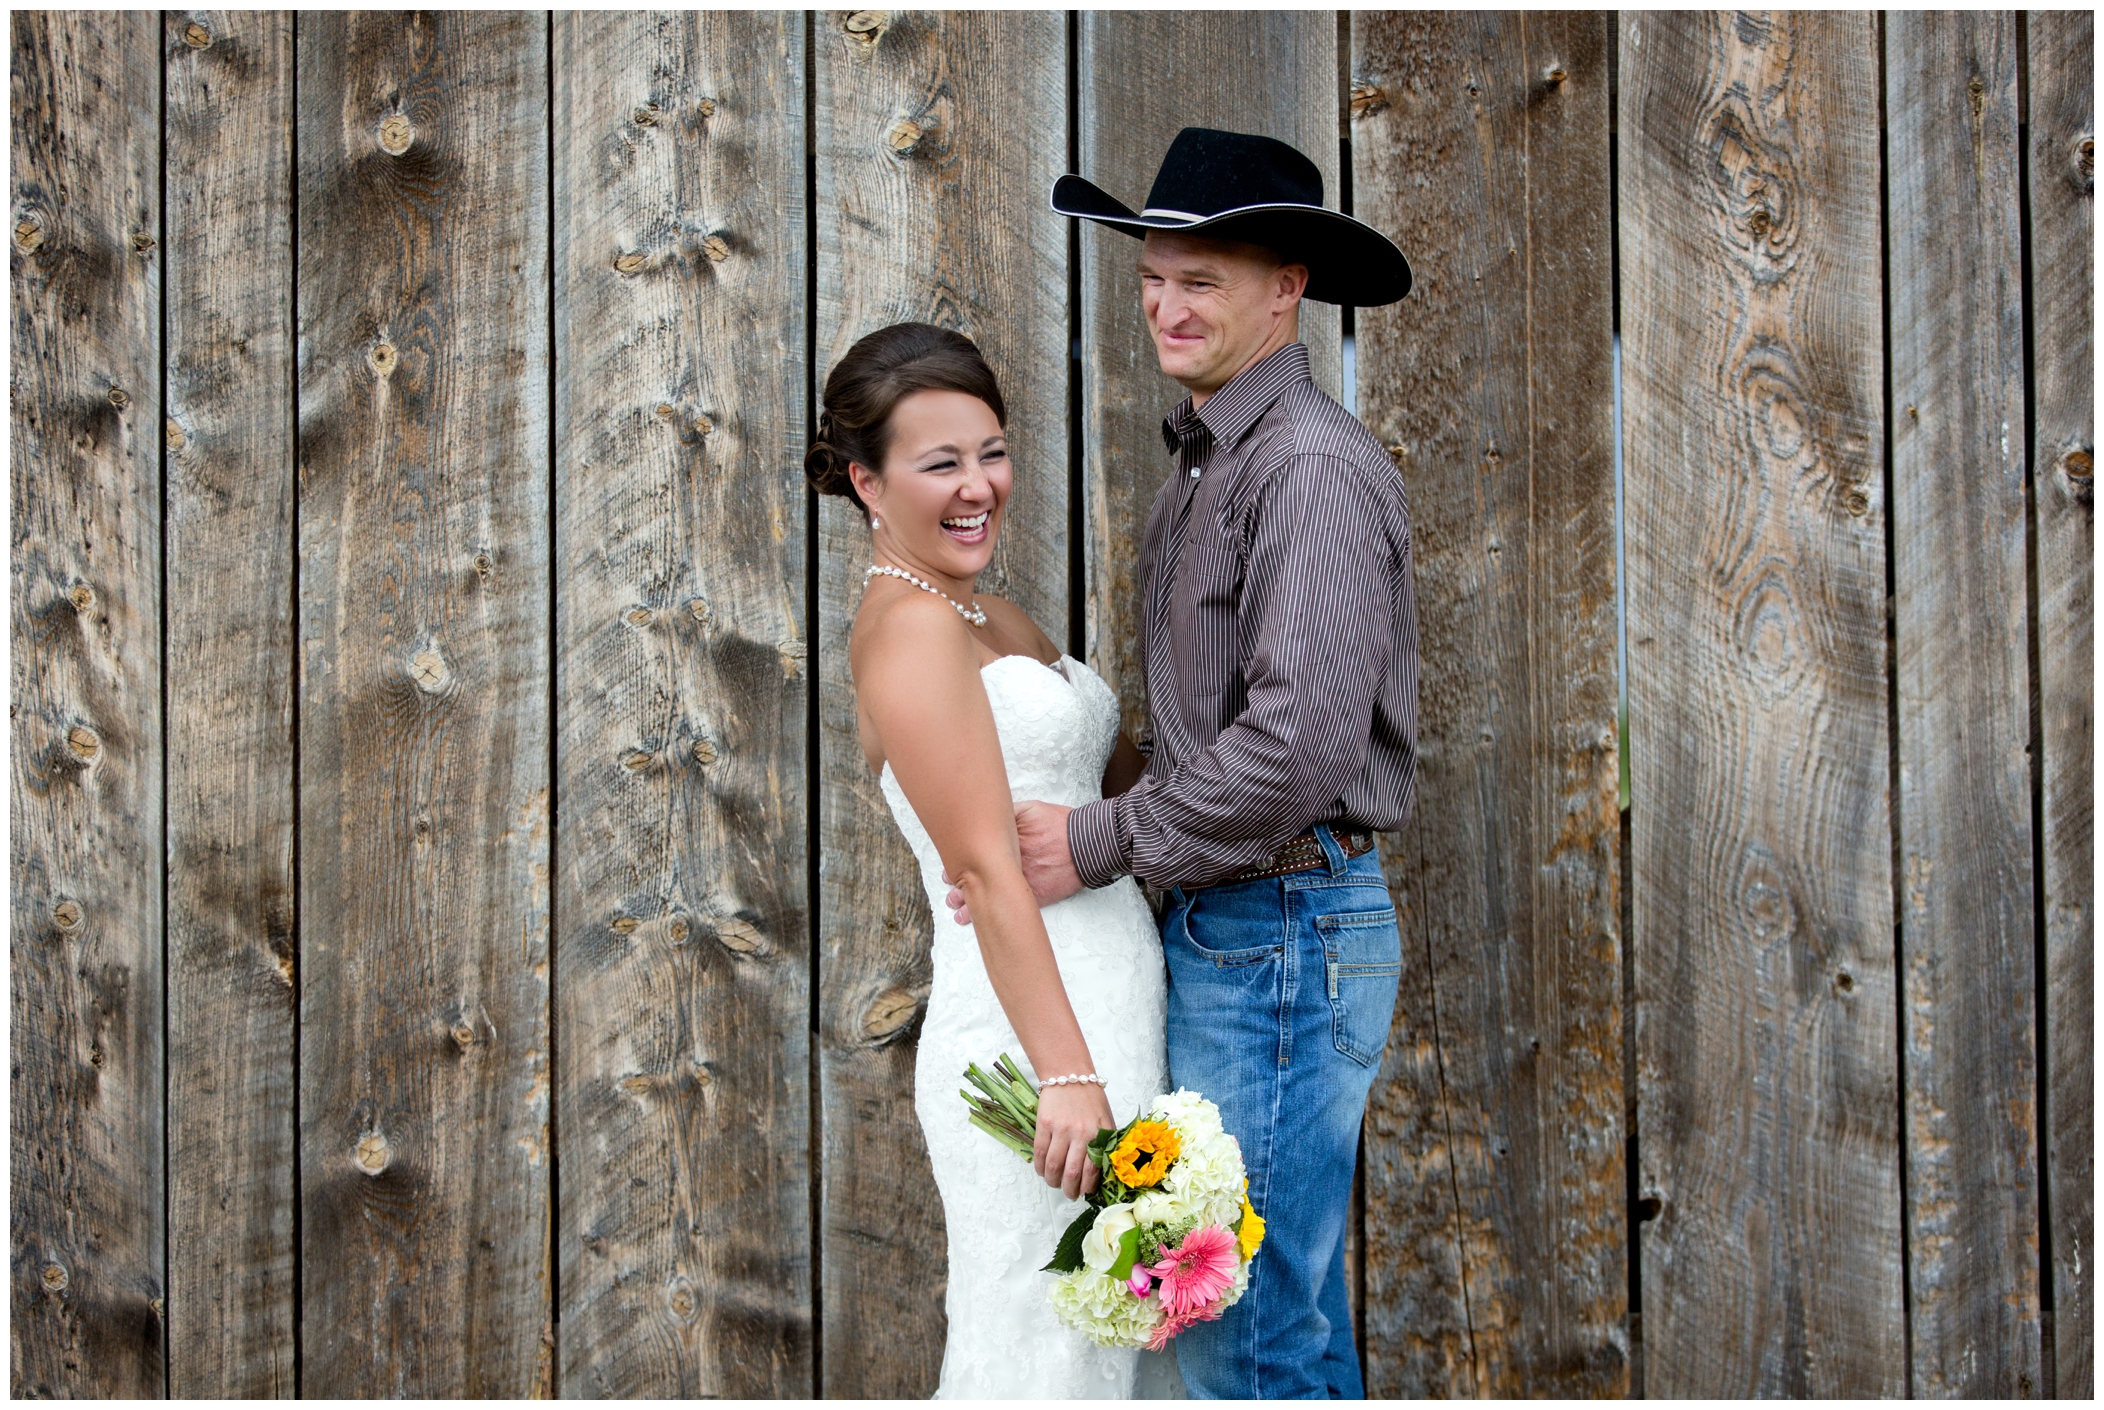 Winding River Ranch wedding photos by Plum Pretty Photography